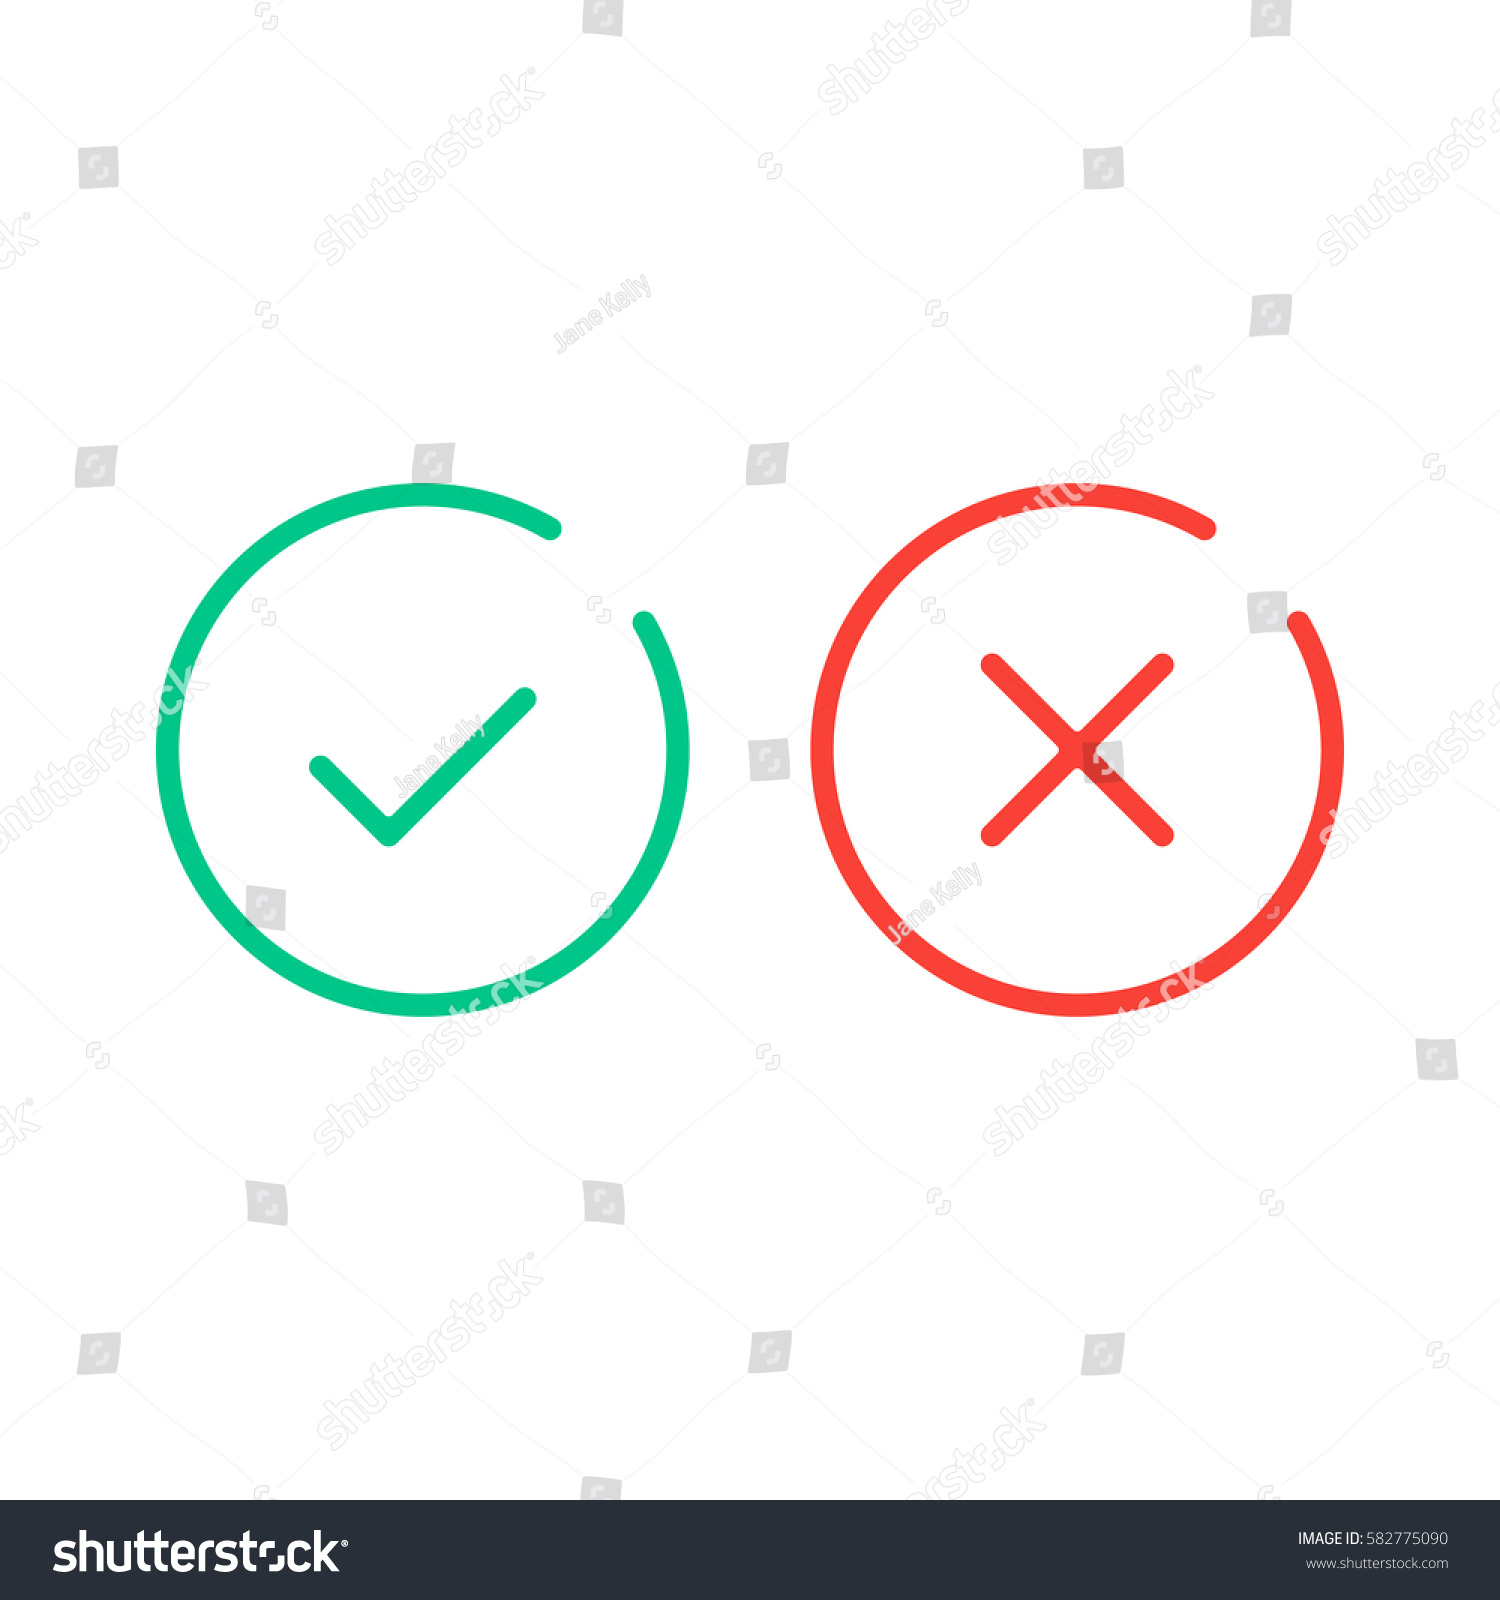 Thin line check mark icons. Green tick and red cross checkmarks flat line icons set. Vector illustration isolated on white background #582775090